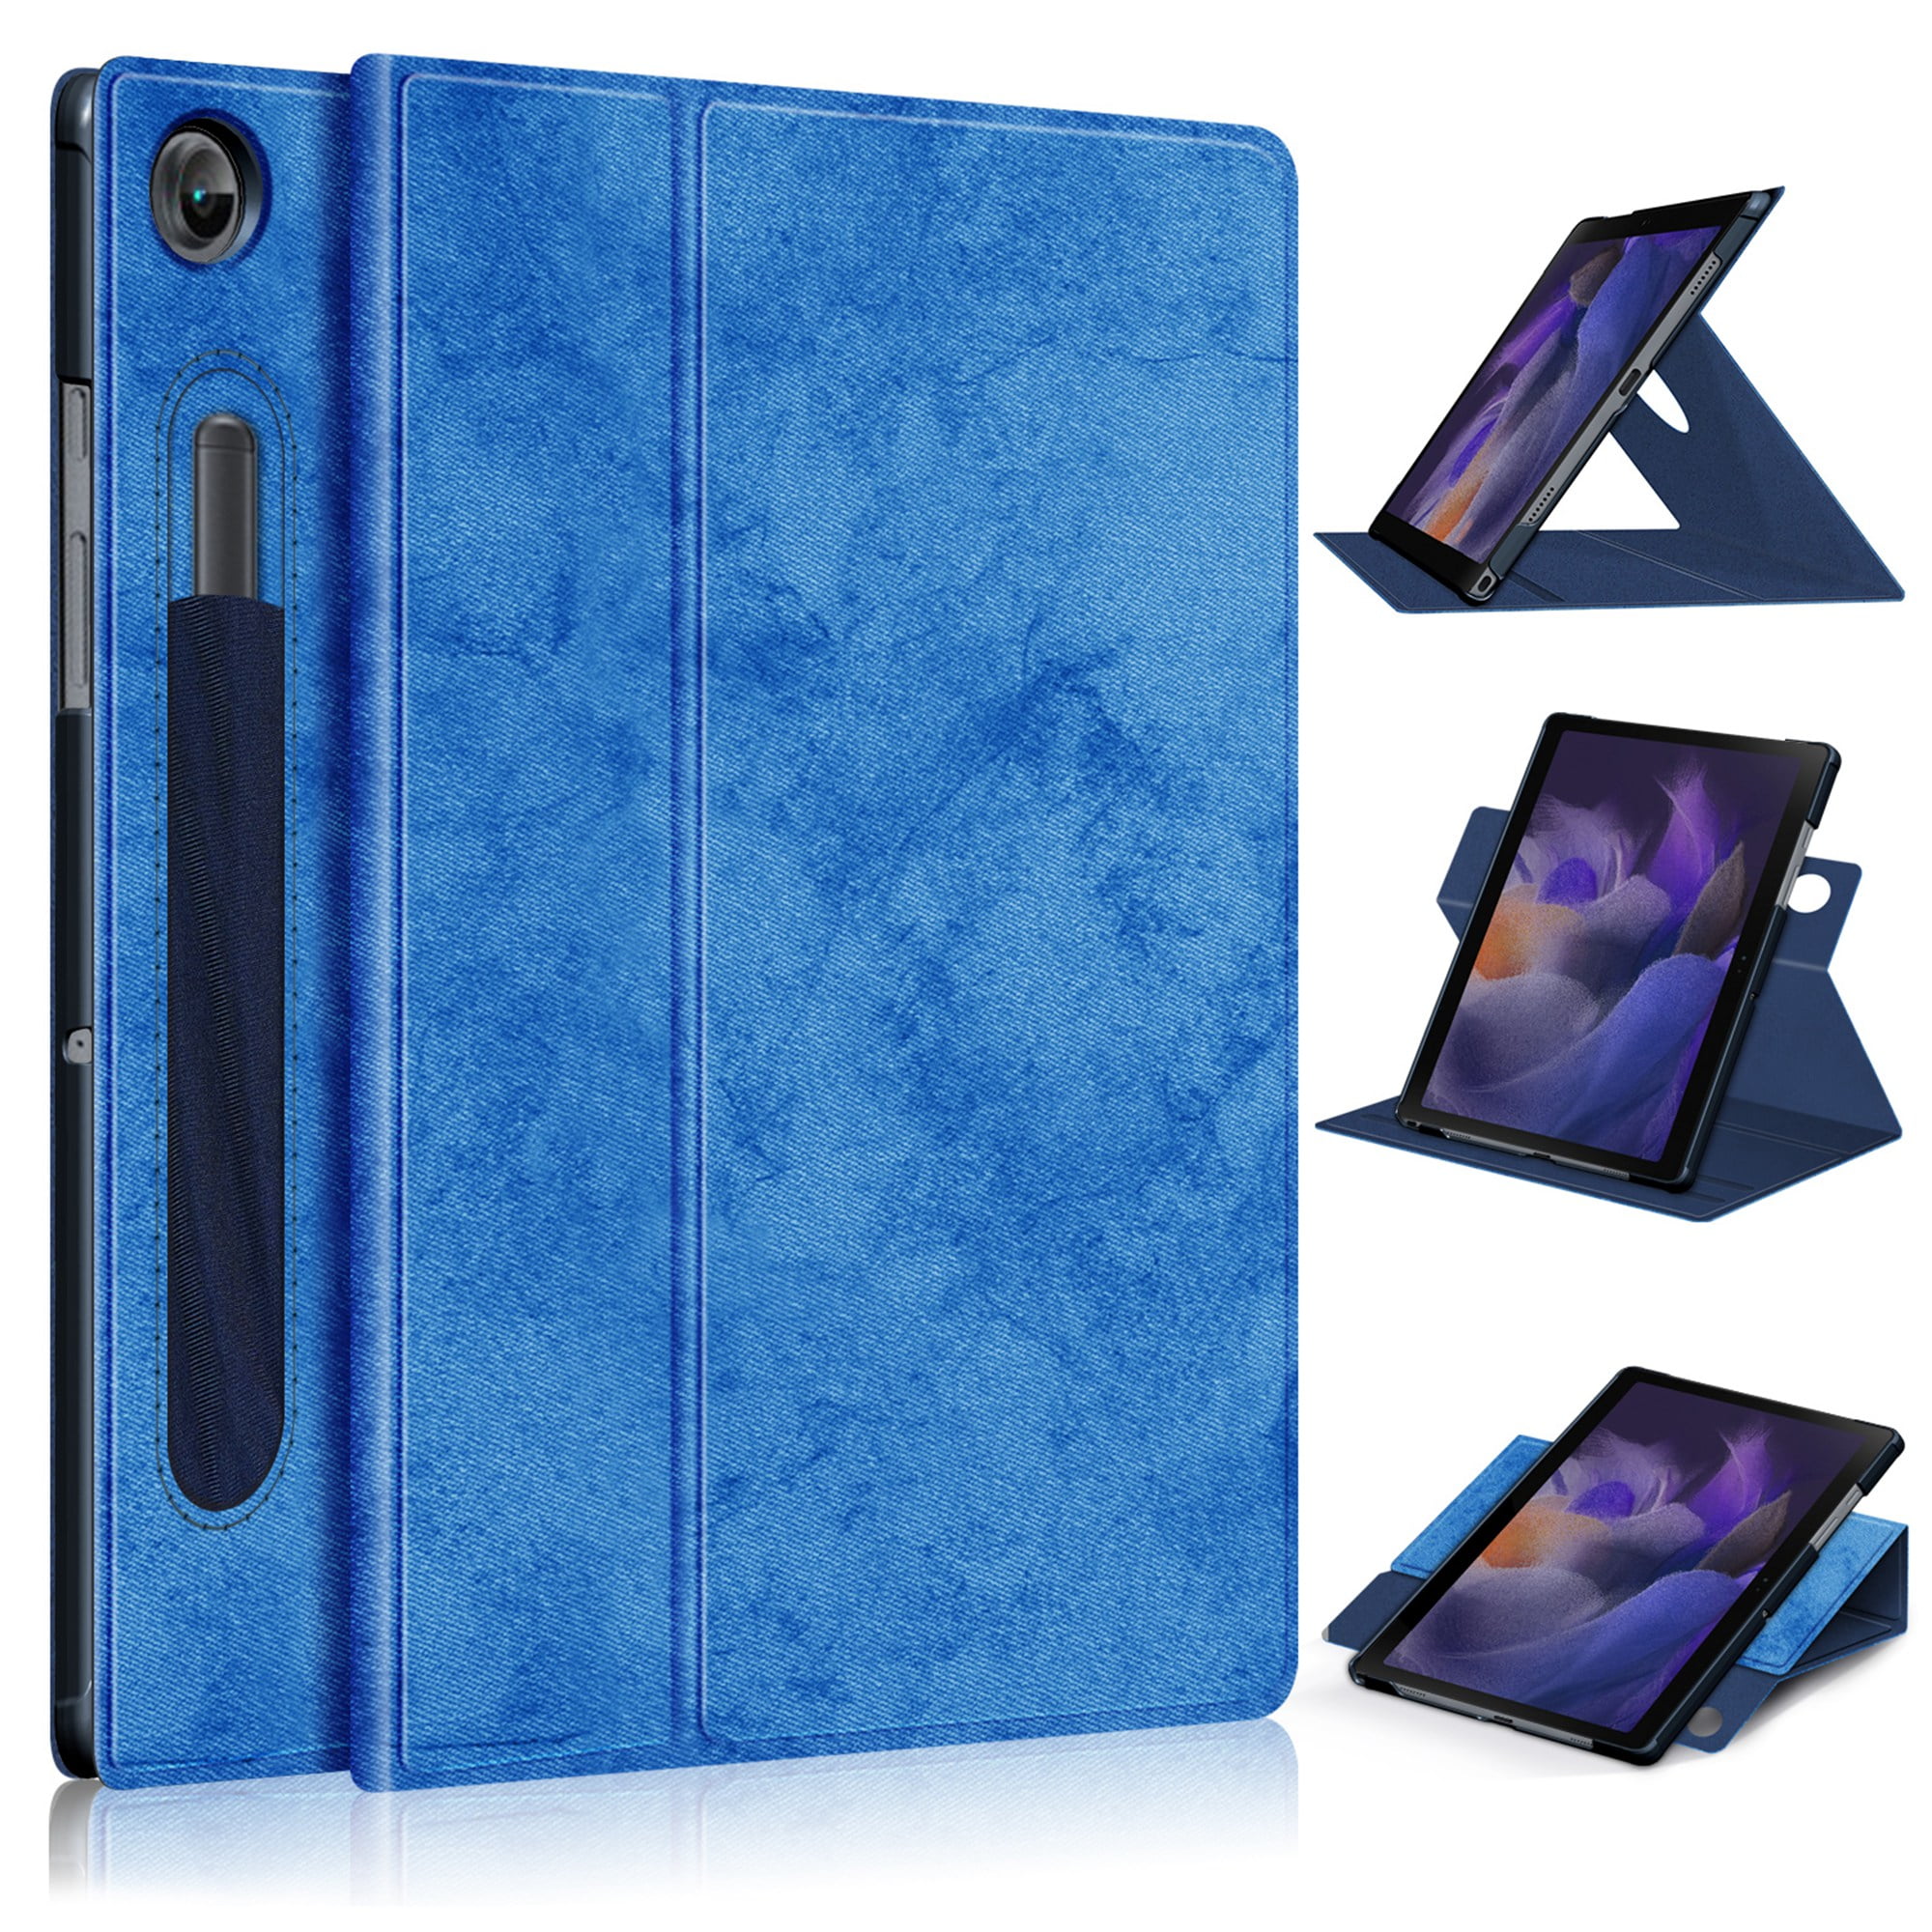 Voorkomen tyfoon optioneel Galaxy Tab A8 (10.5") Case (SM-X200) - TECH CIRCLE Rotating Fold Stand  Folio Case Protective PU Leather Flip Cover with [Pencil Holder] for 2022 Samsung  Galaxy Tab A8 10.5-Inch Android Tablet,Darkblue -